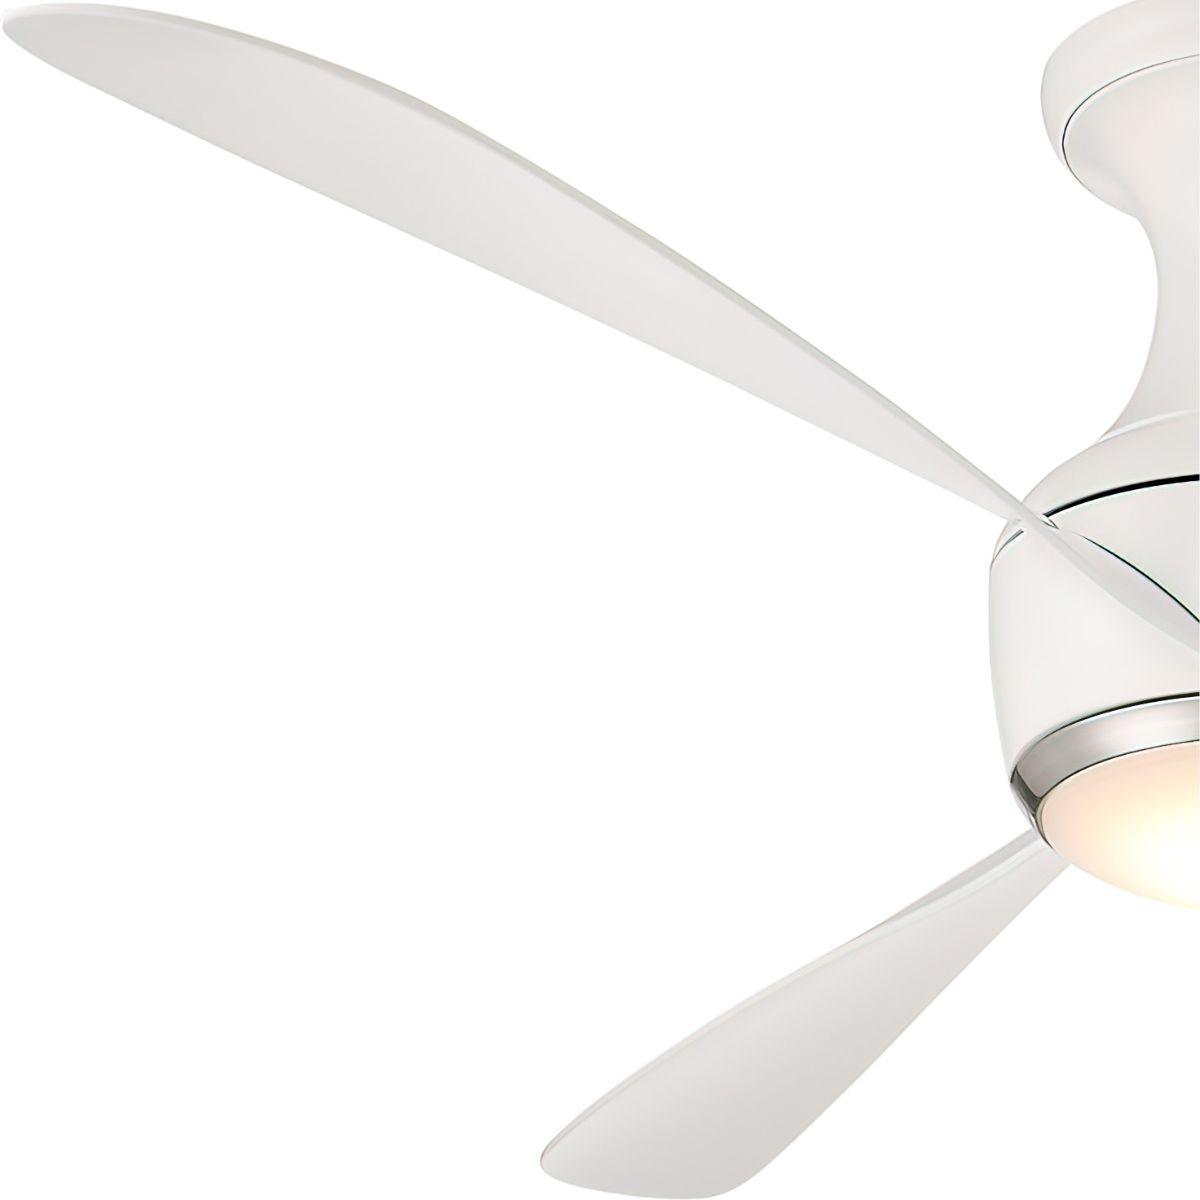 Corona 52 Inch Modern Outdoor Smart Ceiling Fan With 2700K LED And Remote